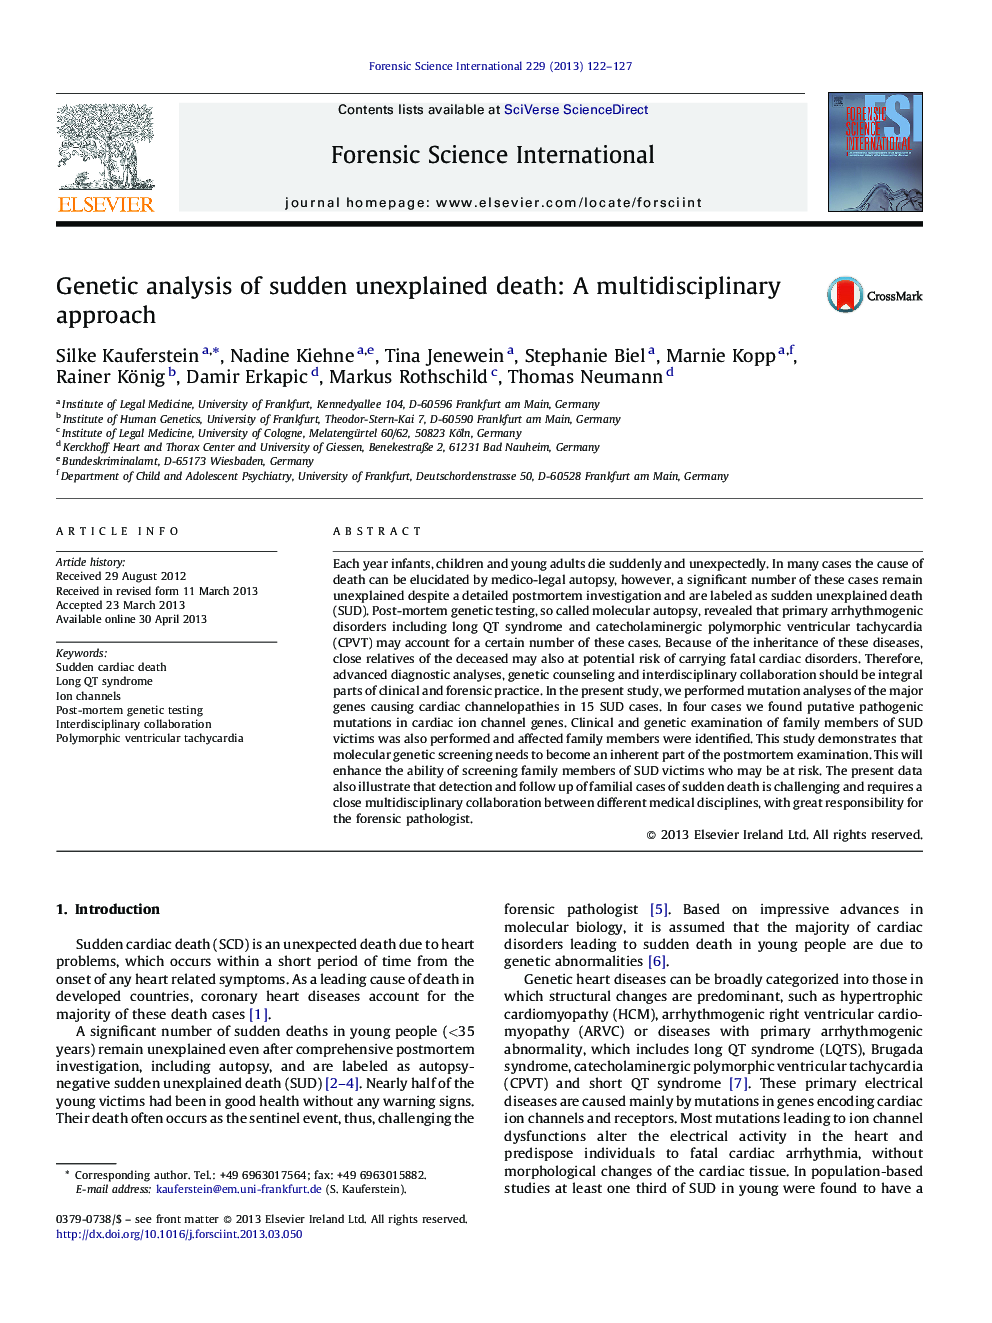 Genetic analysis of sudden unexplained death: A multidisciplinary approach